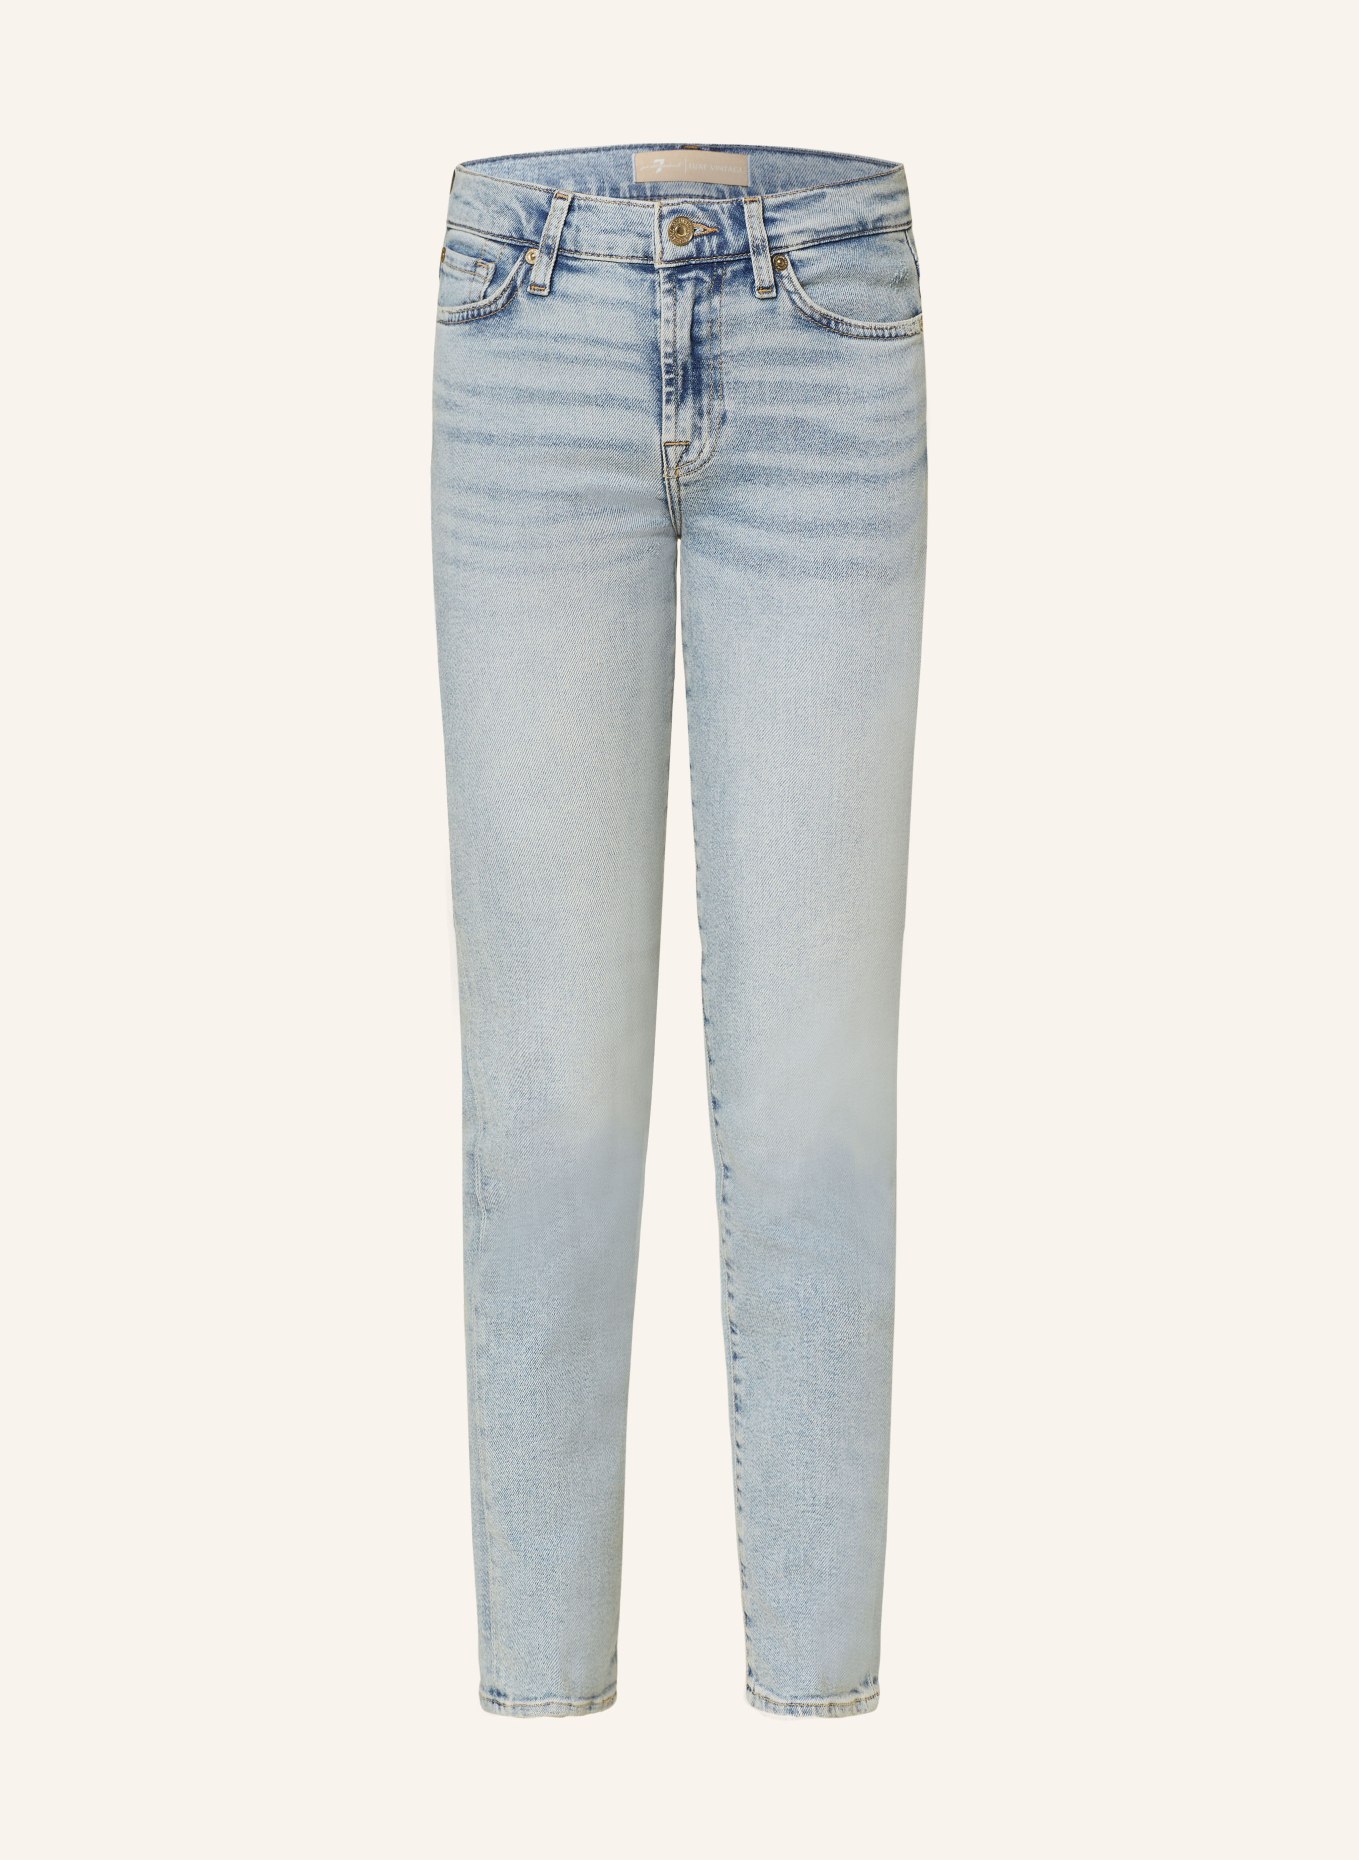 7 for all mankind Skinny Jeans ROXANNE LUXE VINTAGE, Farbe: LIGHT BLUE (Bild 1)